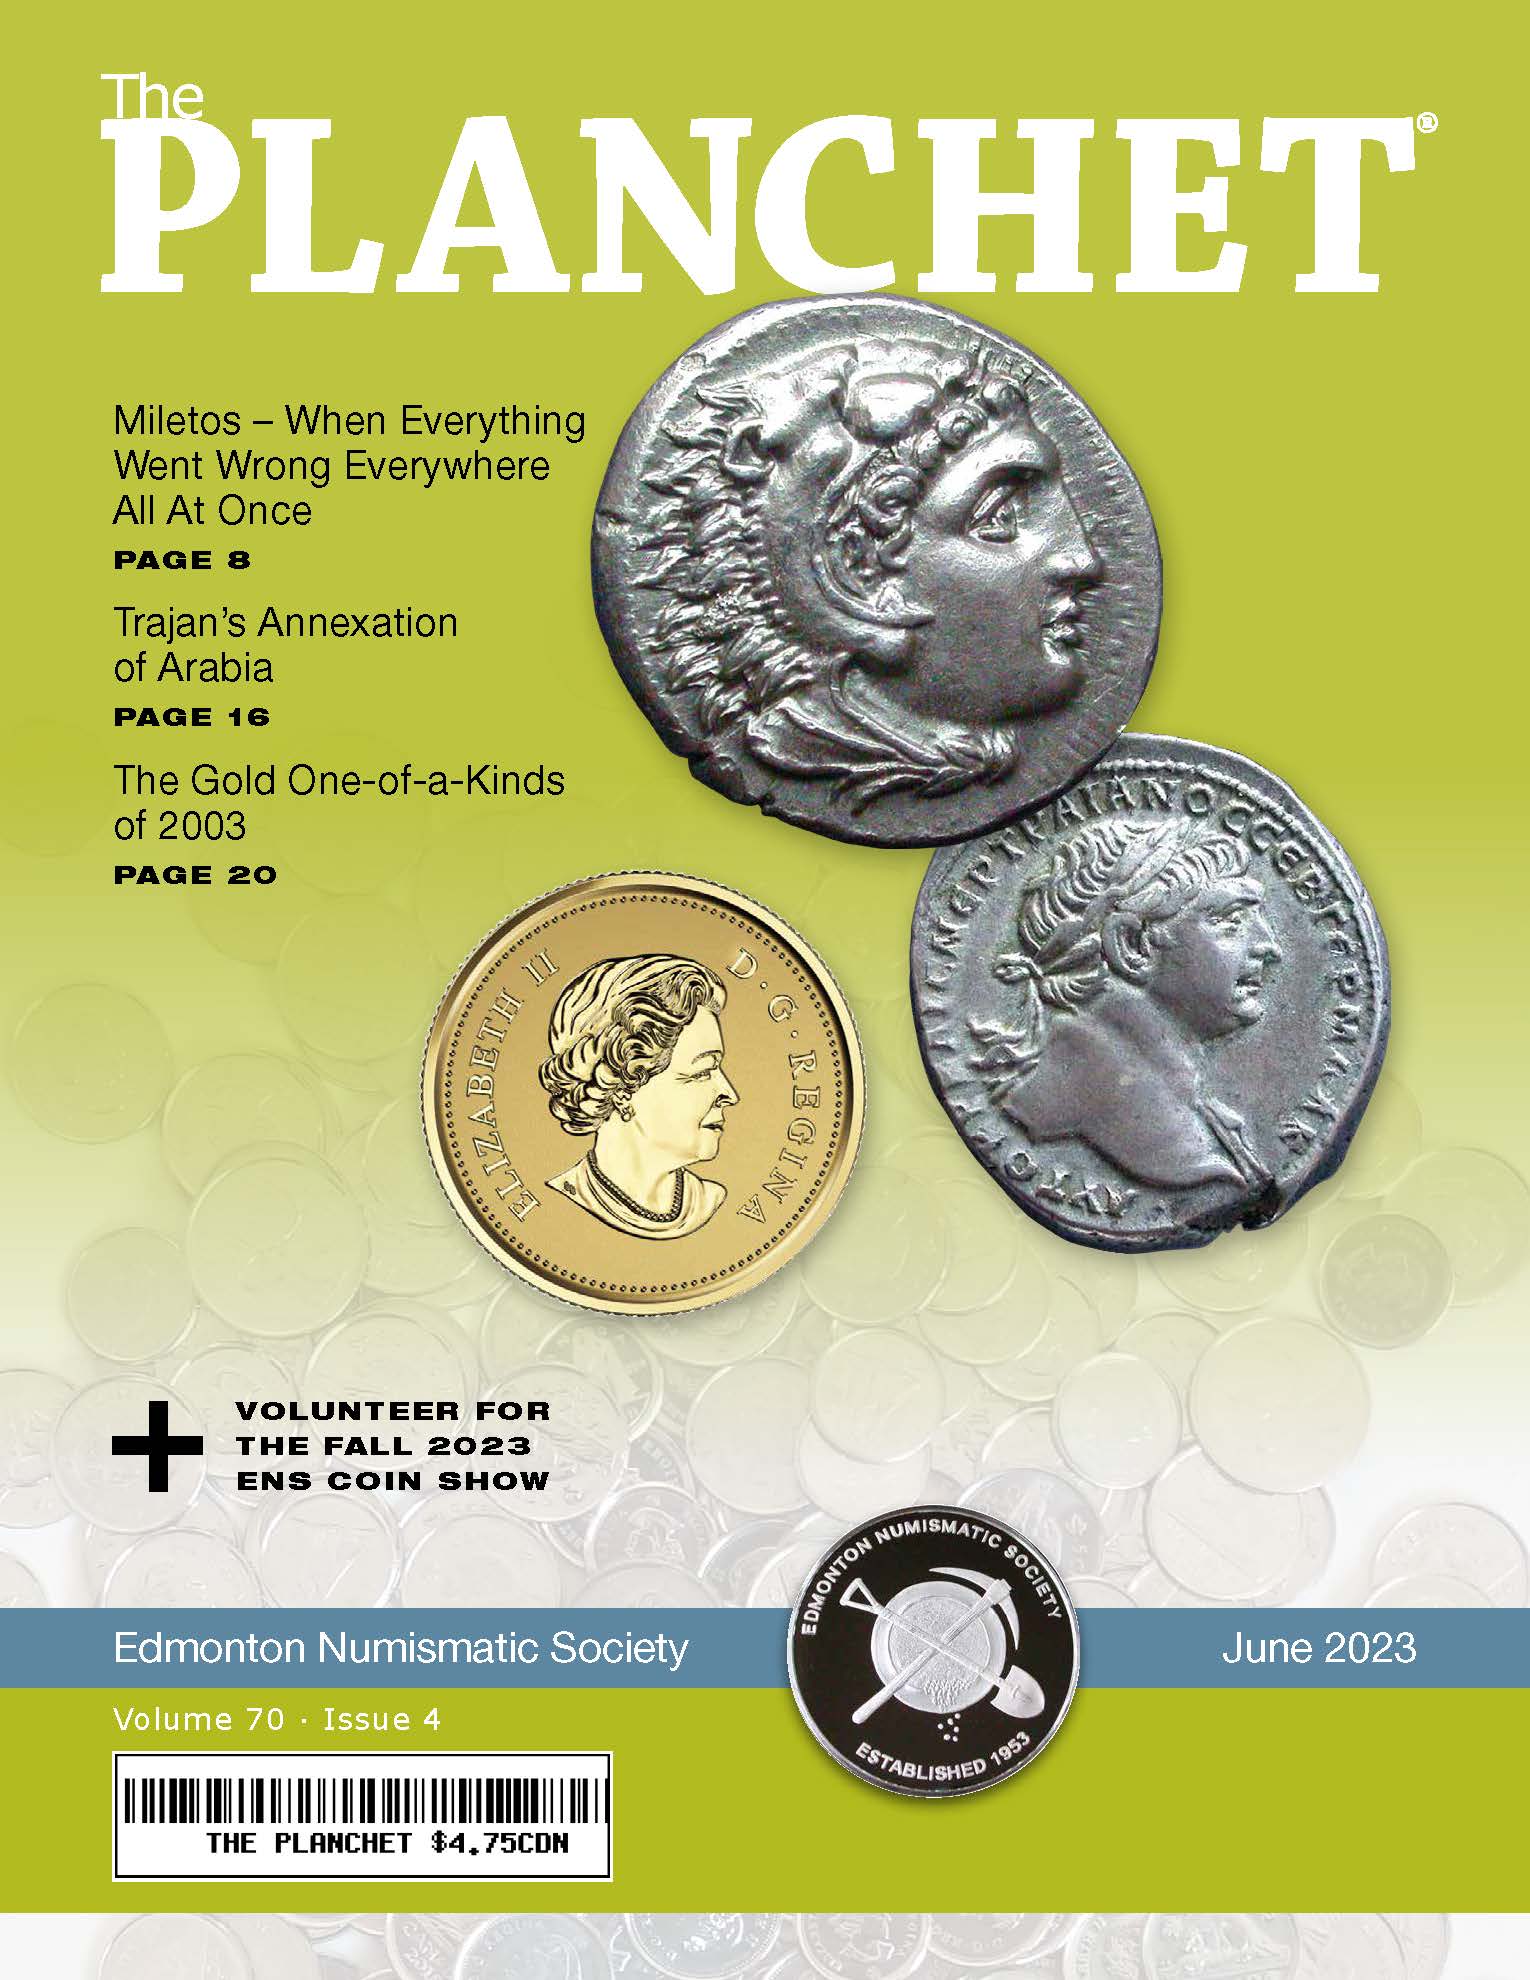 Protected: The Planchet Numismatic Magazine: June 2023